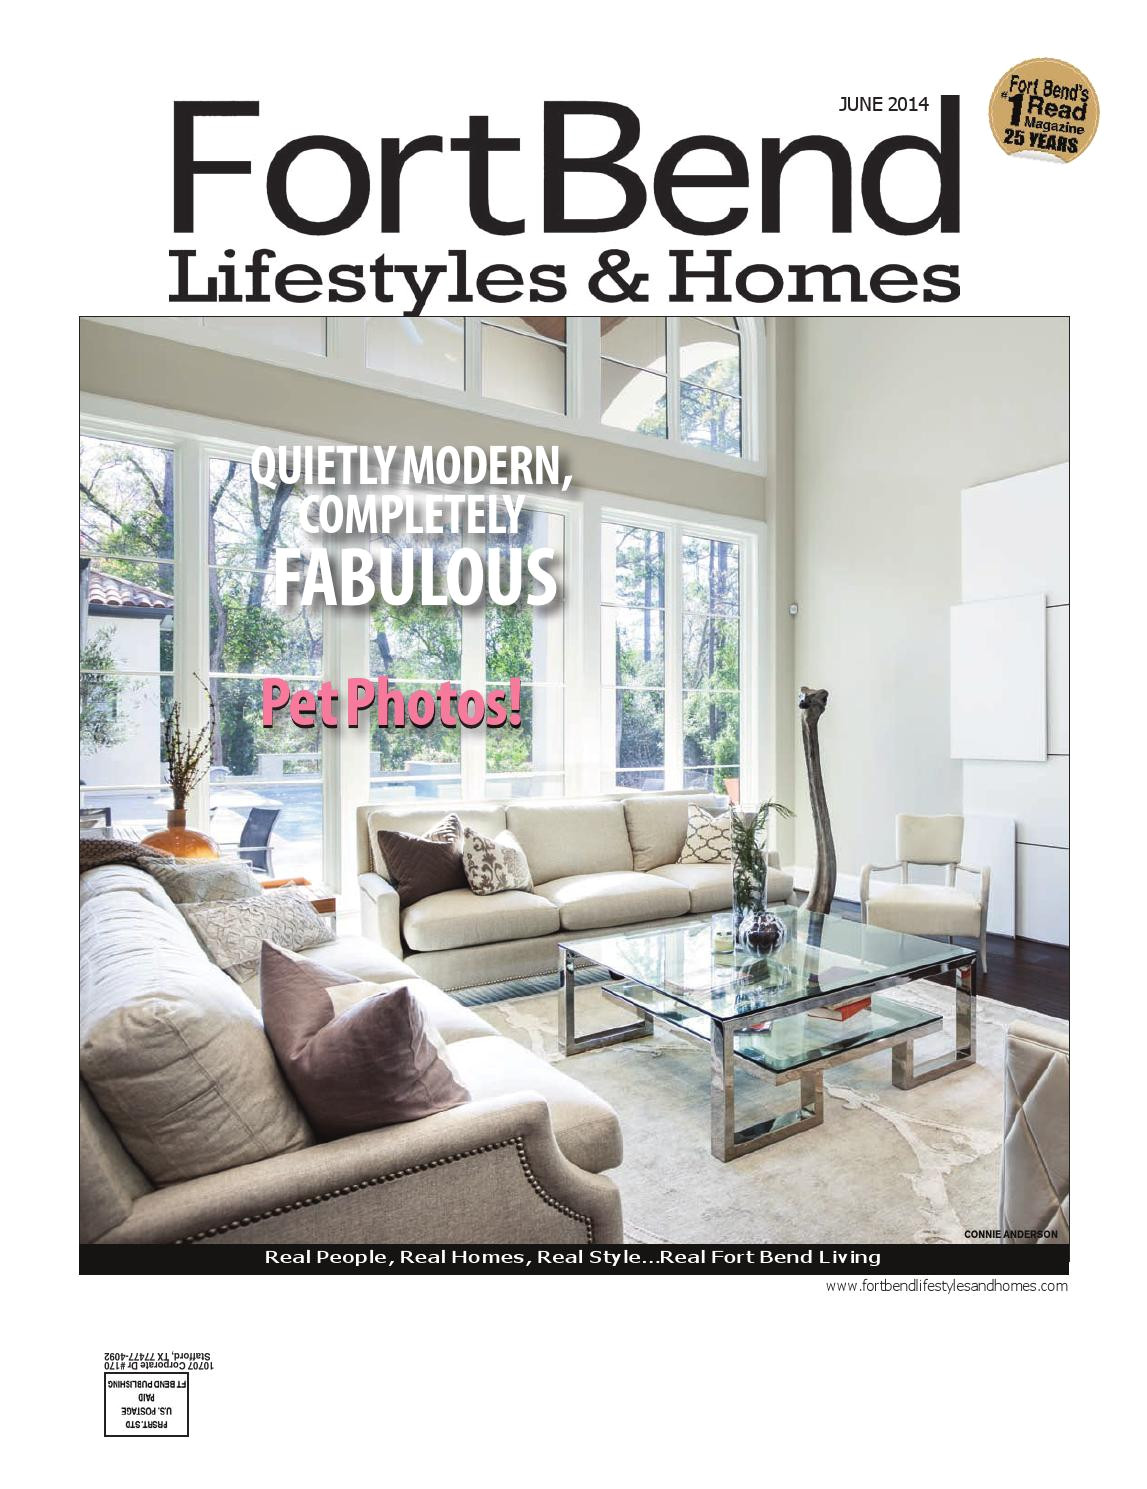 fort bend lifestyles homes june 2014 by lifestyles homes magazines fort bend publishing issuu